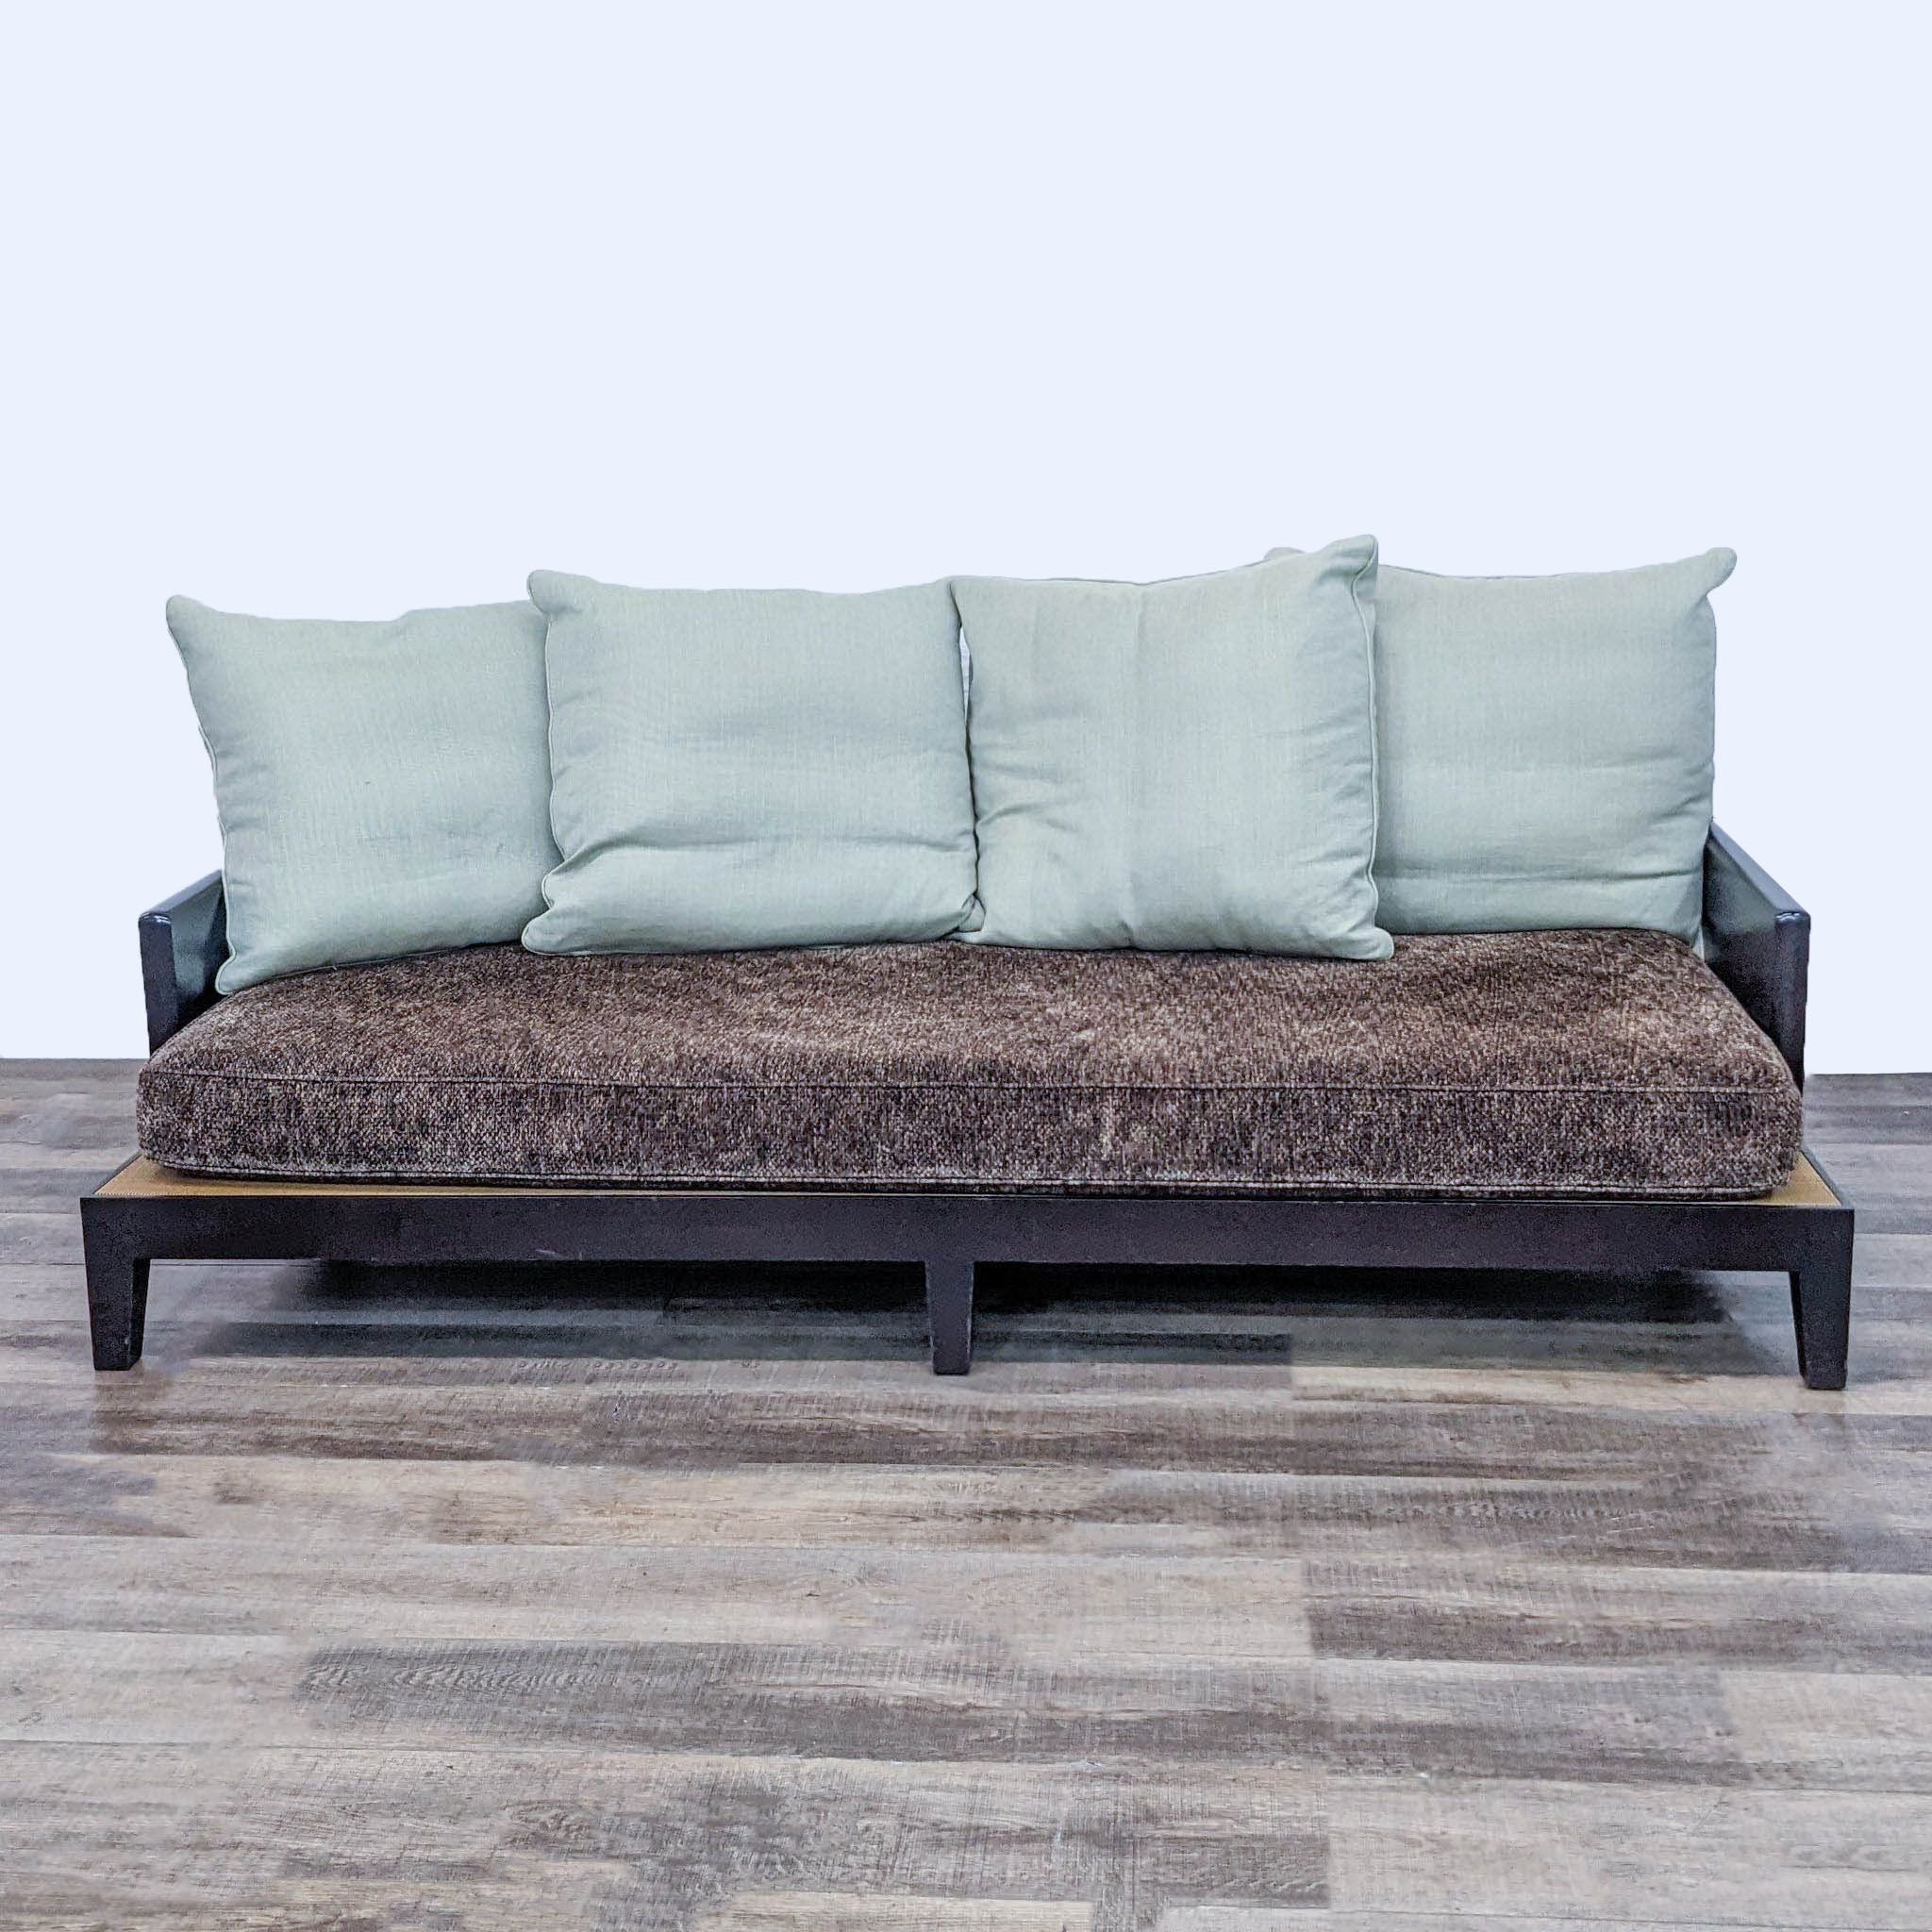 Reperch brand sleek wood frame sofa with brown textured fabric and pastel blue back cushions, on wood floor.